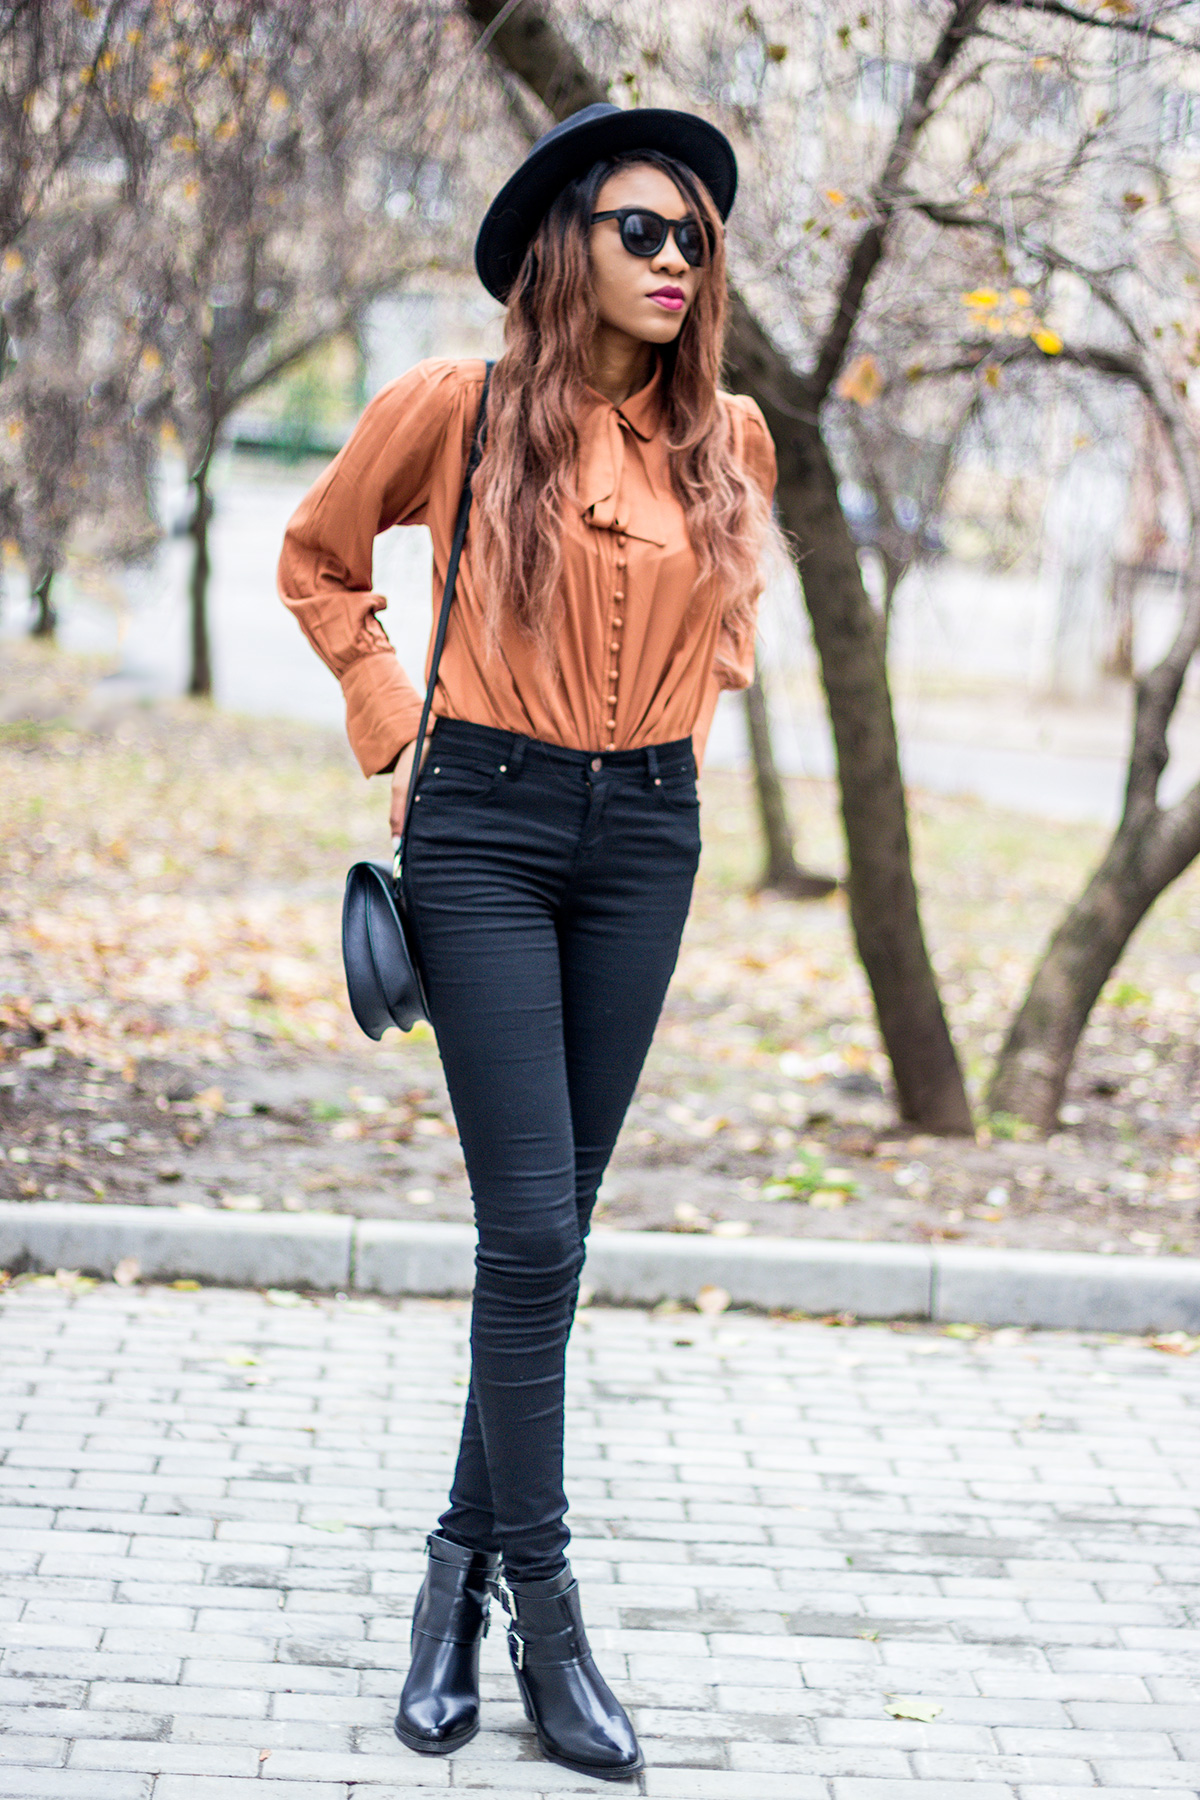 trendy top and hat outfit